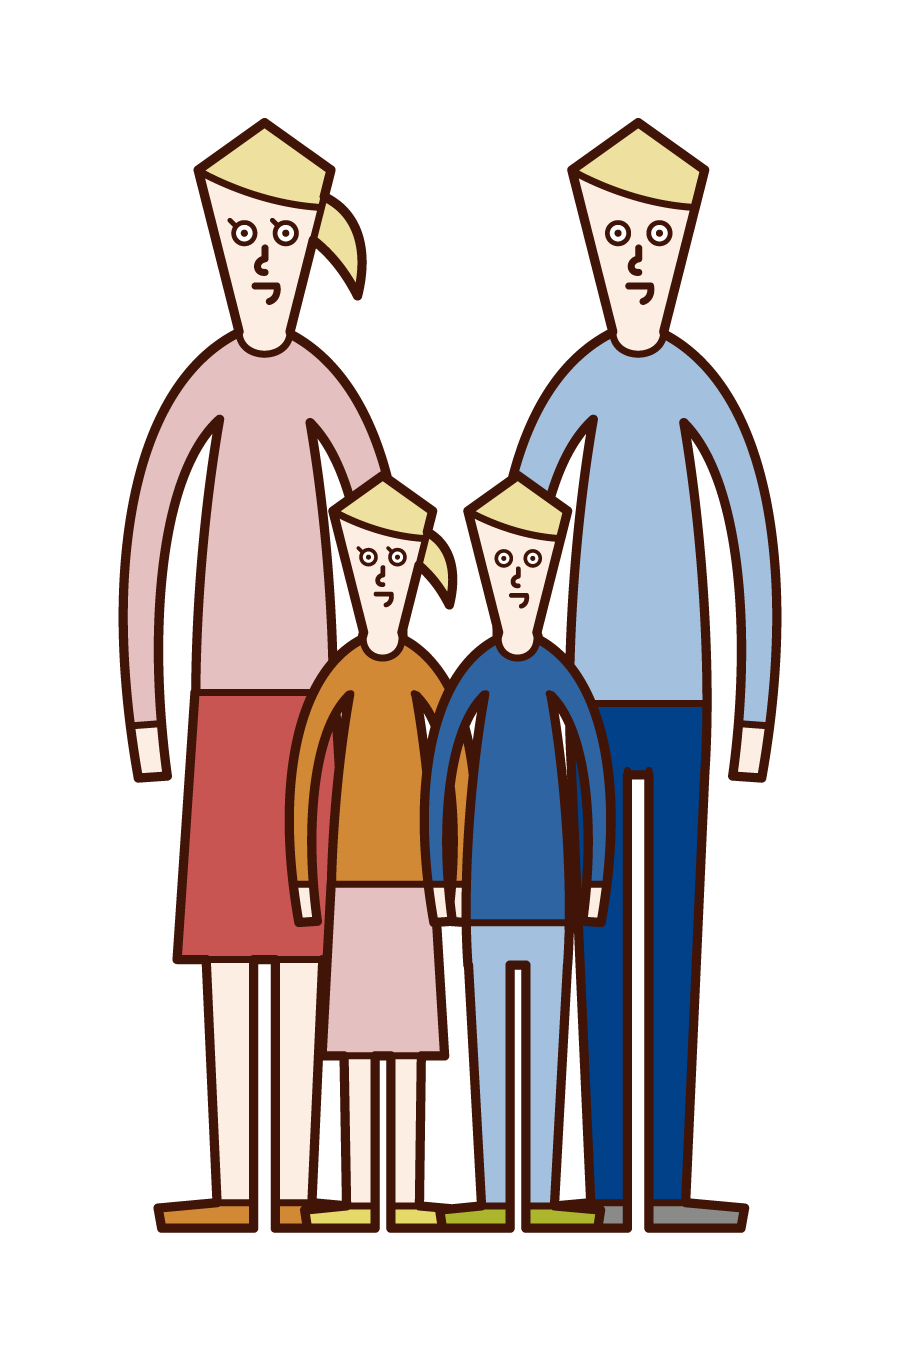 Illustration of a family of four